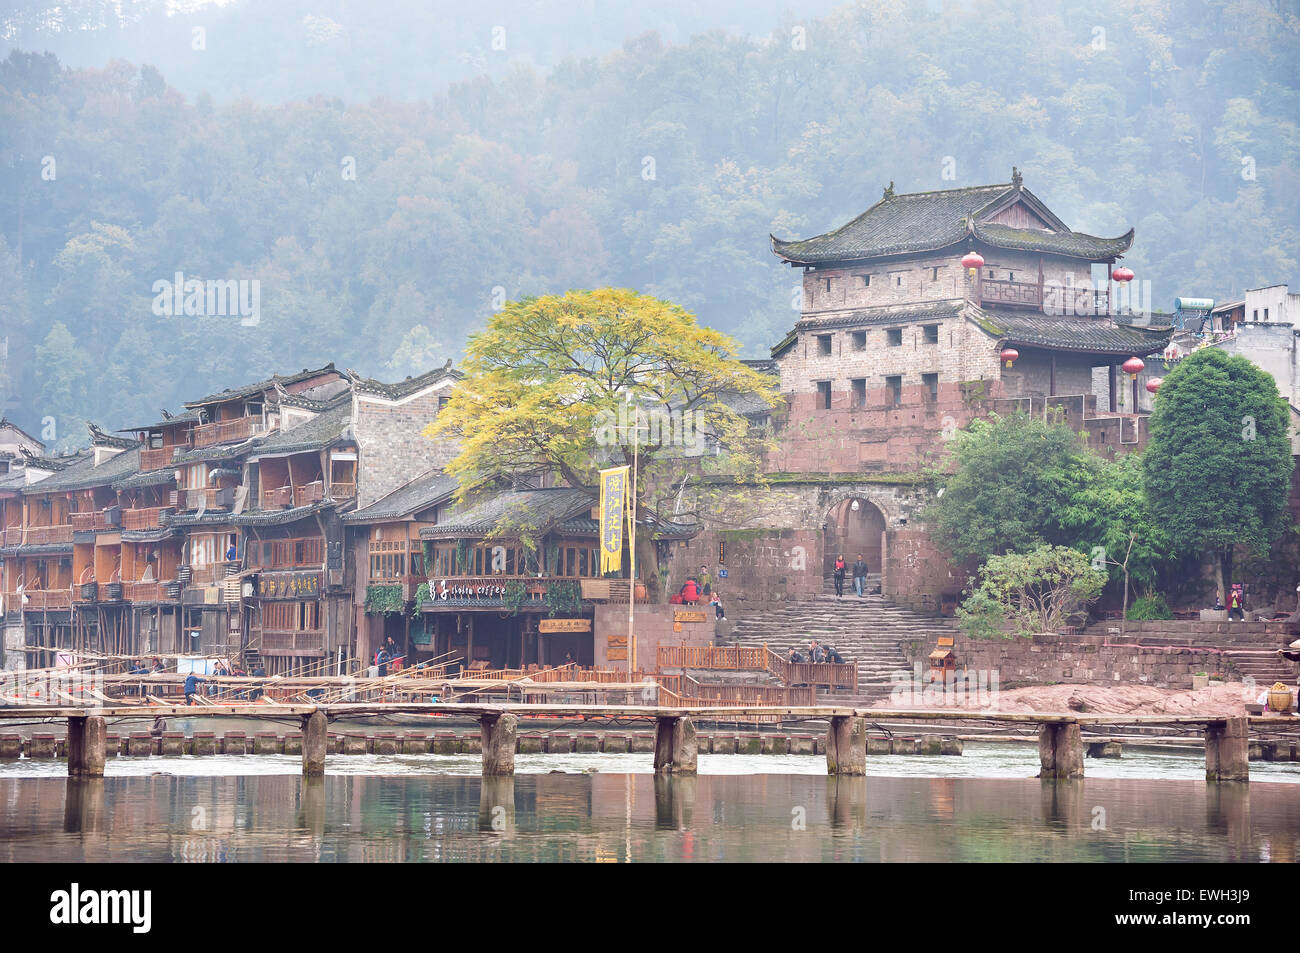 North Gate Tower and Tuojiang River in Fenghuang, Hunan Province, China Stock Photo